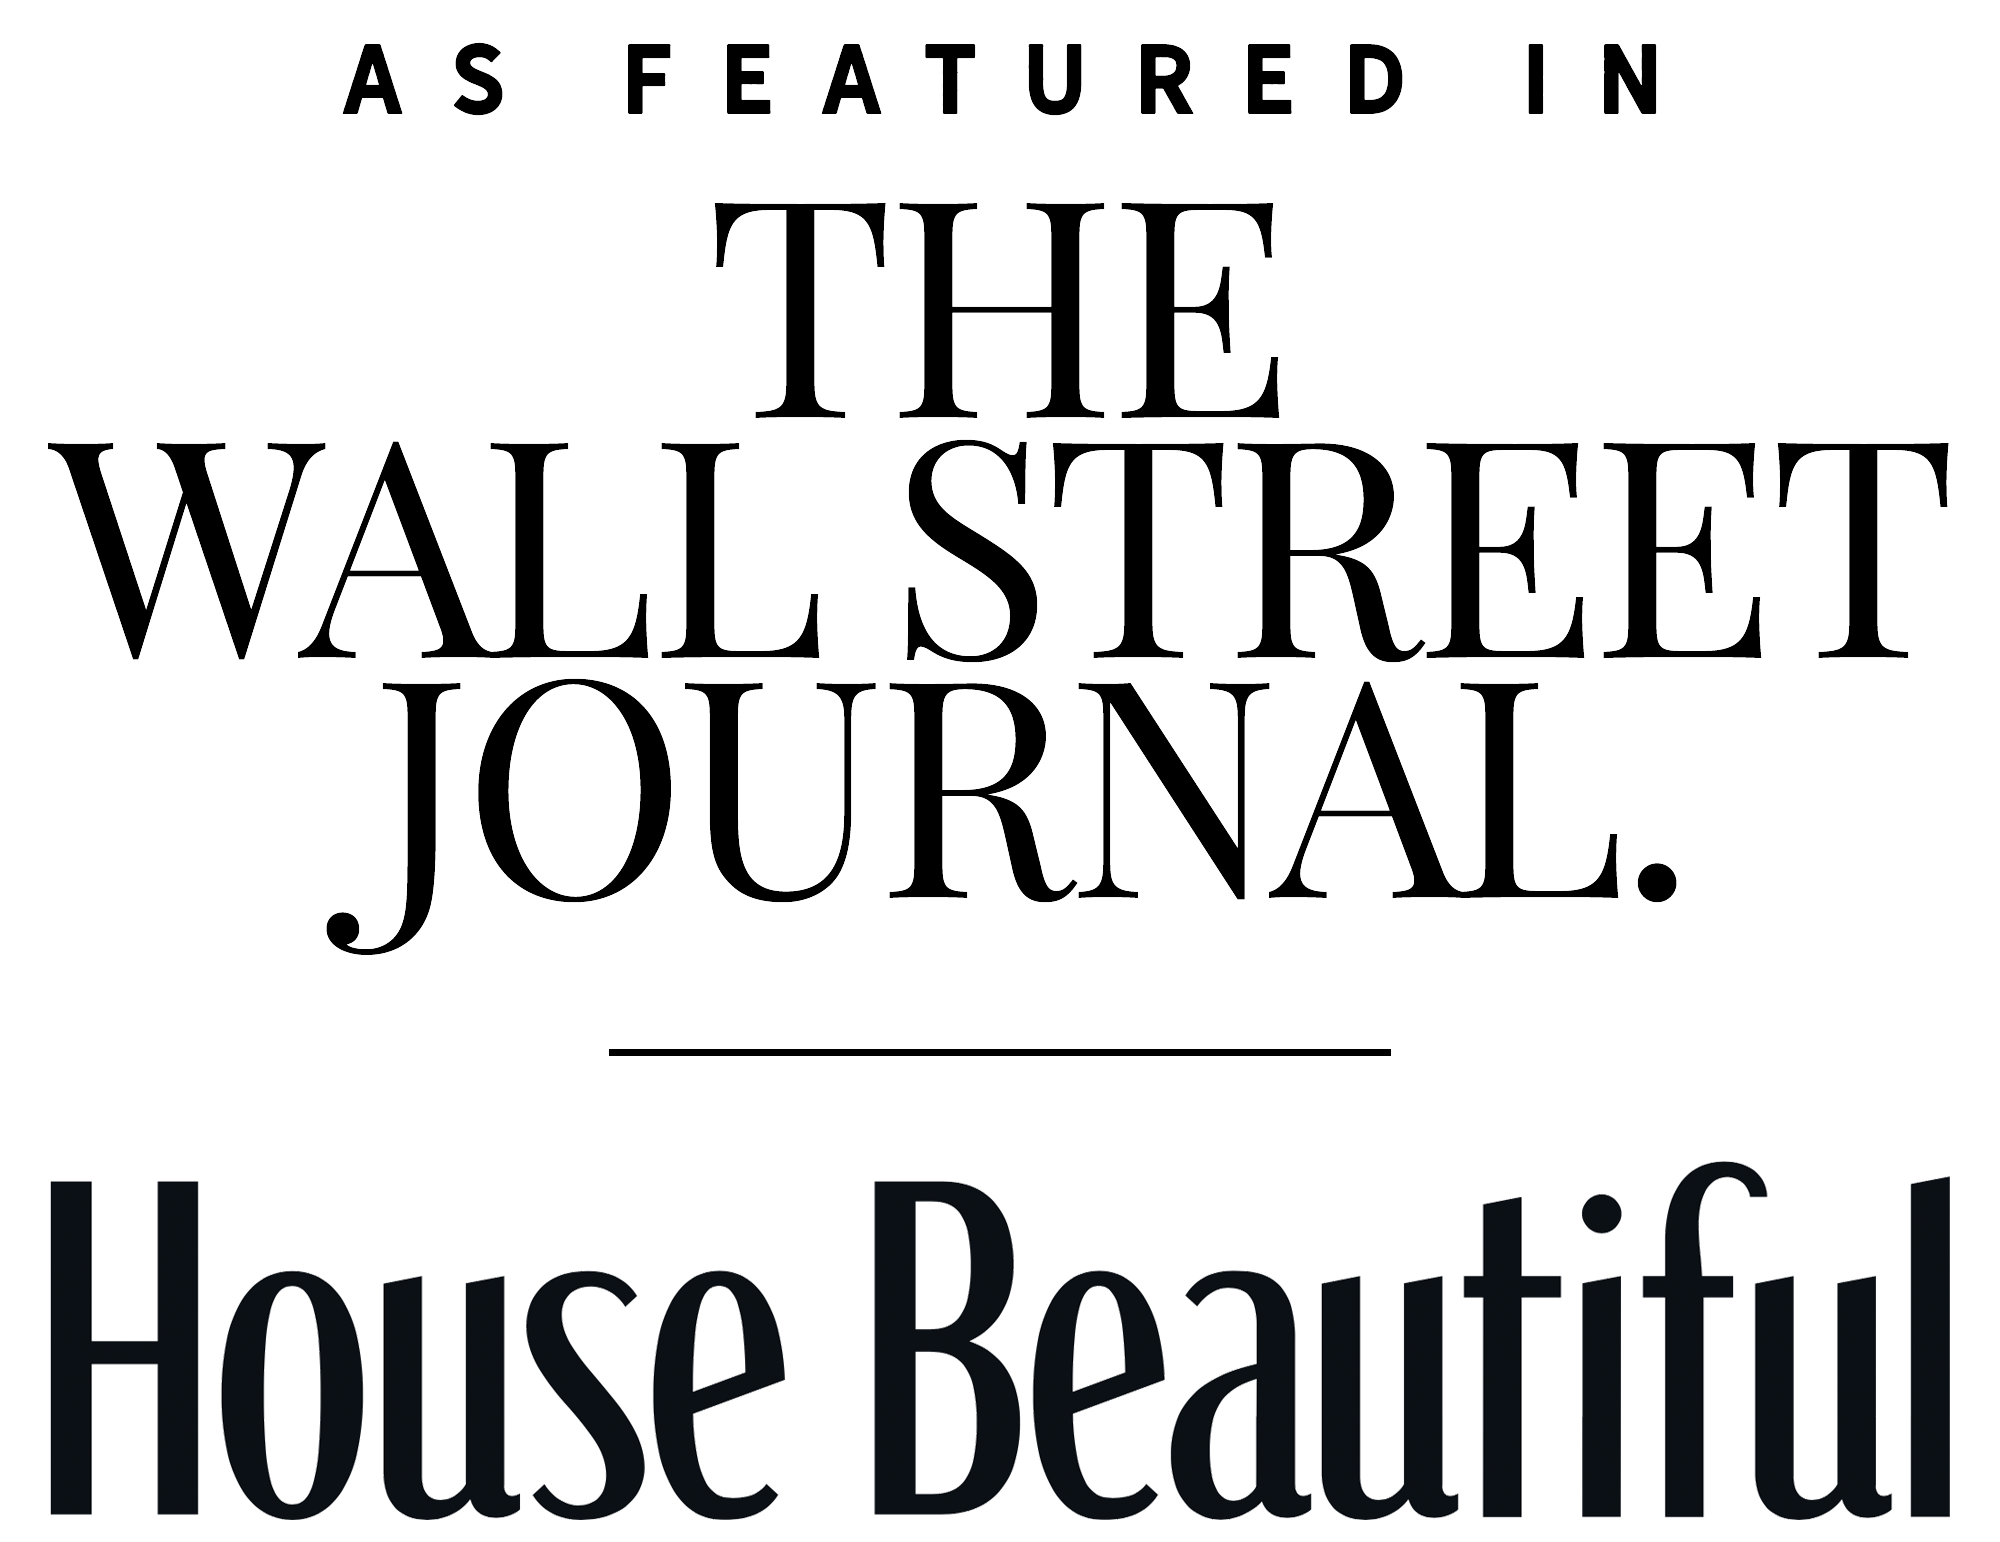 As featured in The Wall Street Journal